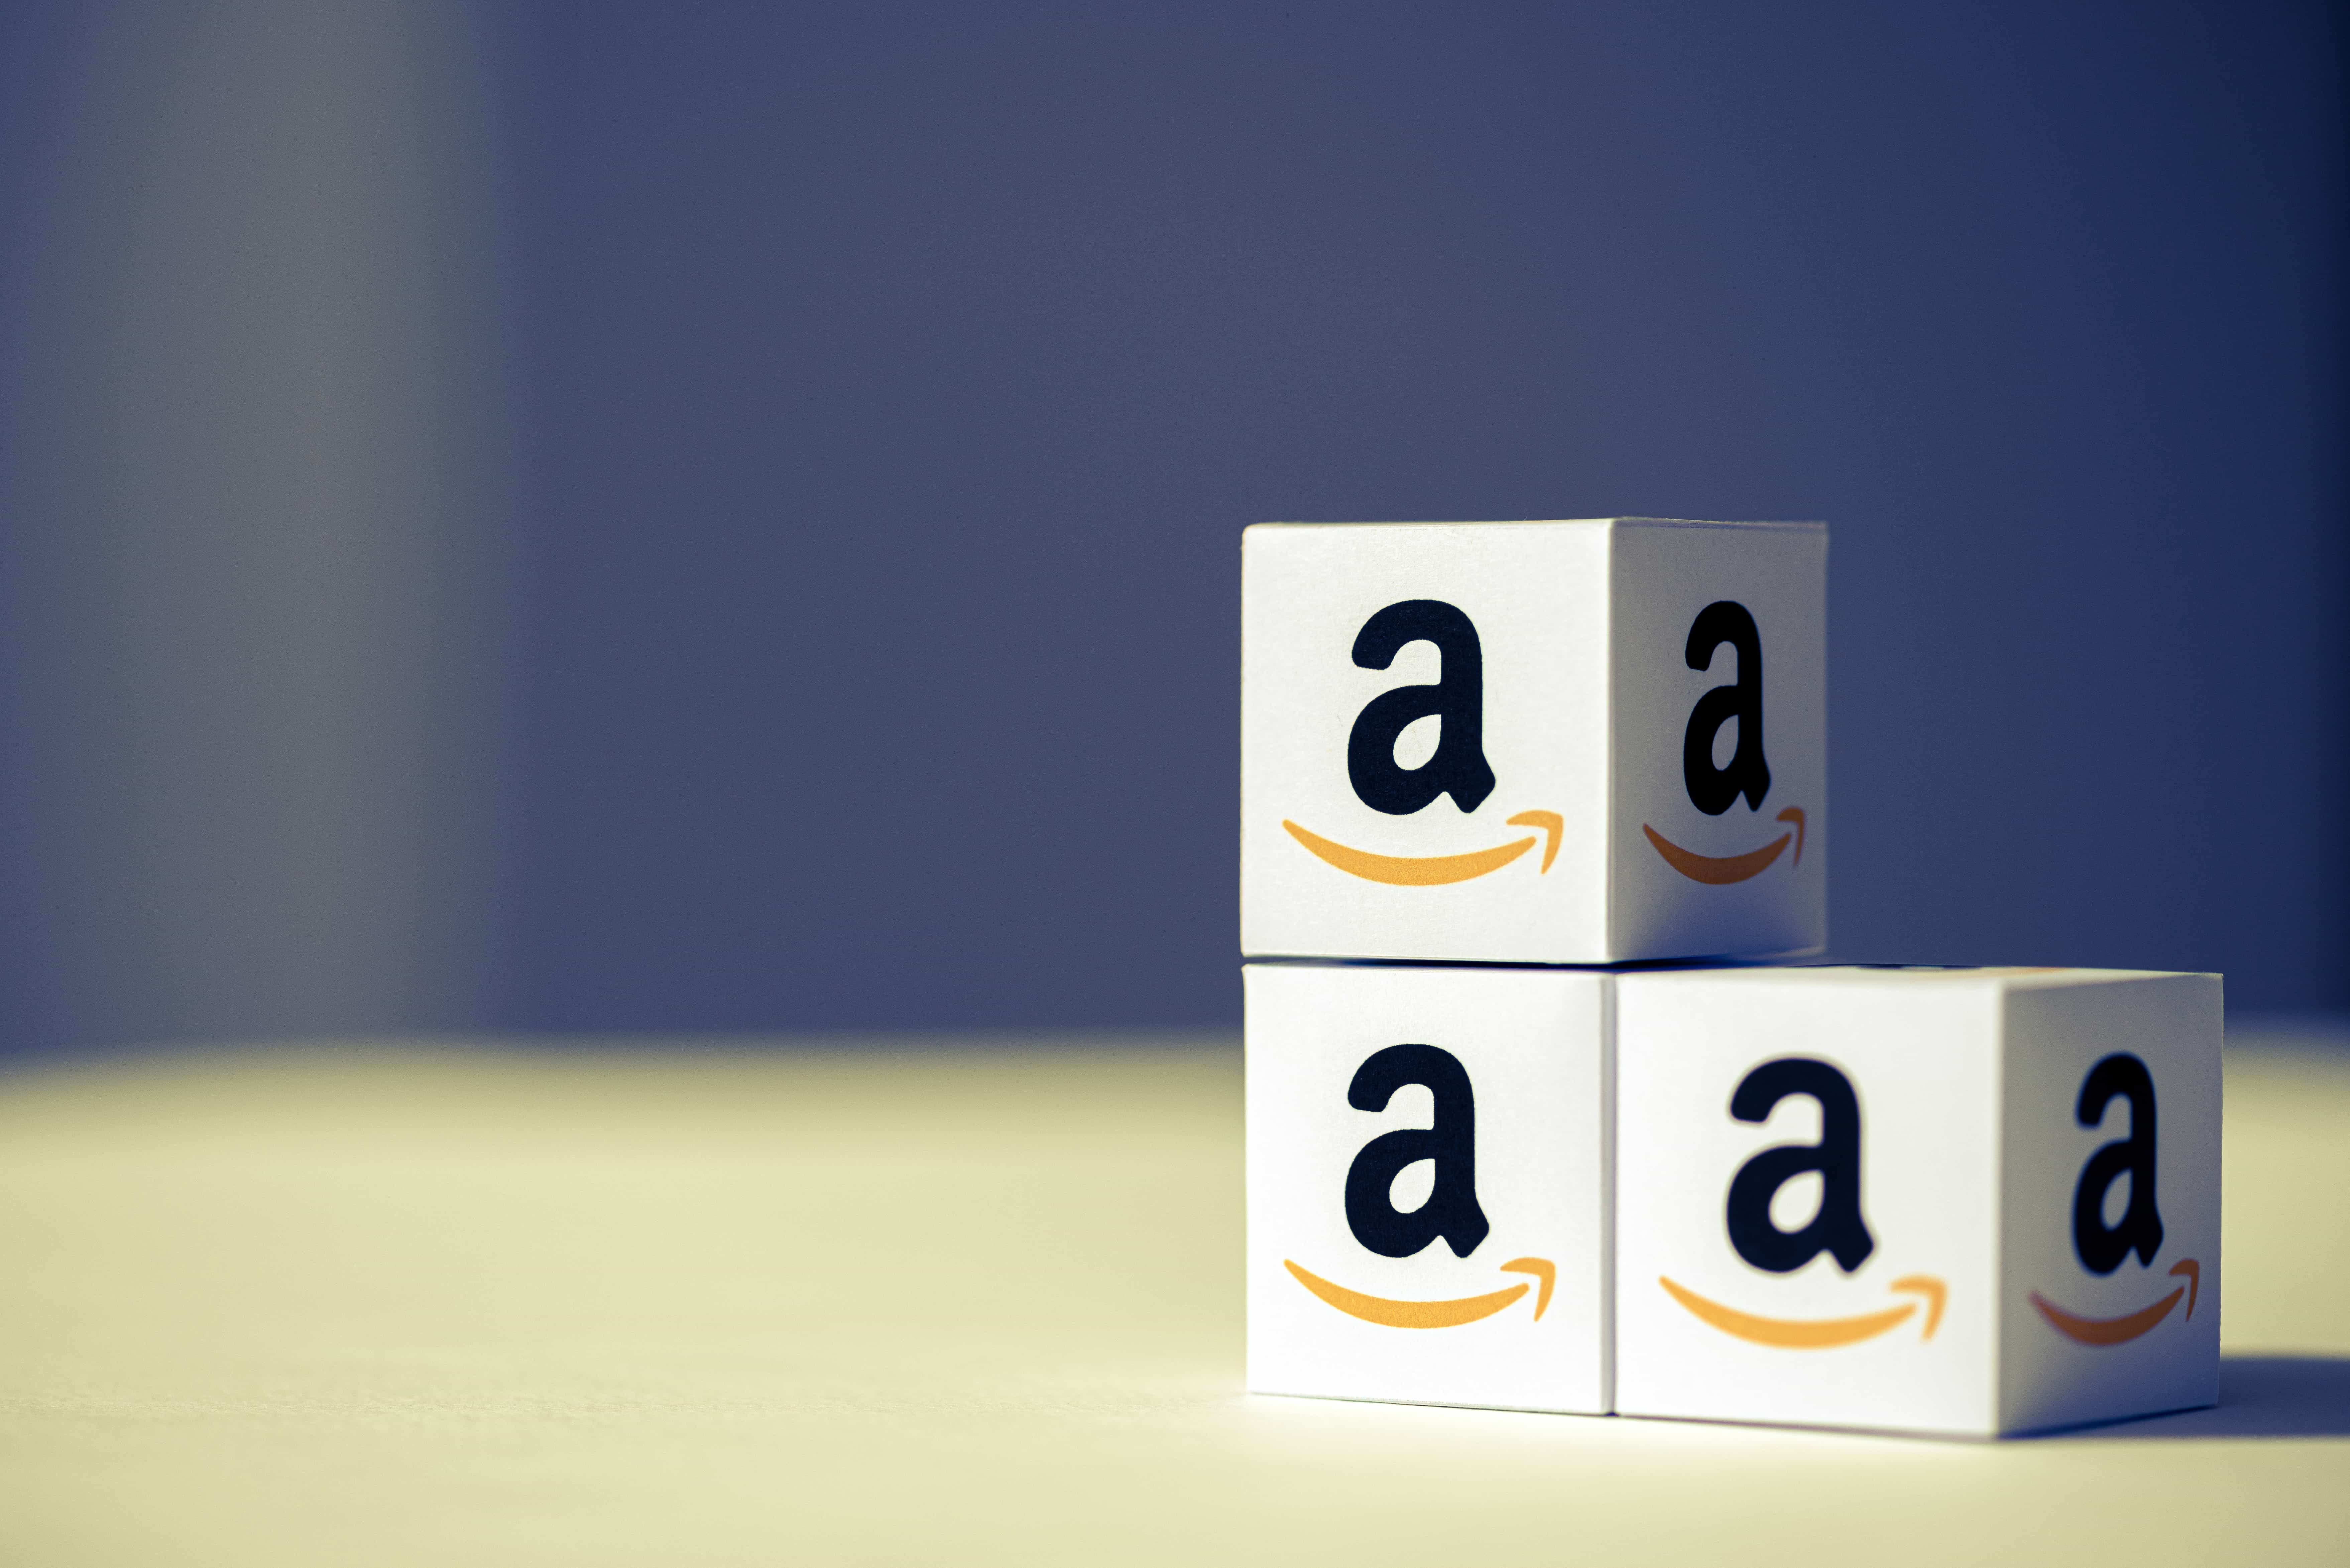 Top 4 Trending Products To Sell on Amazon in 2022